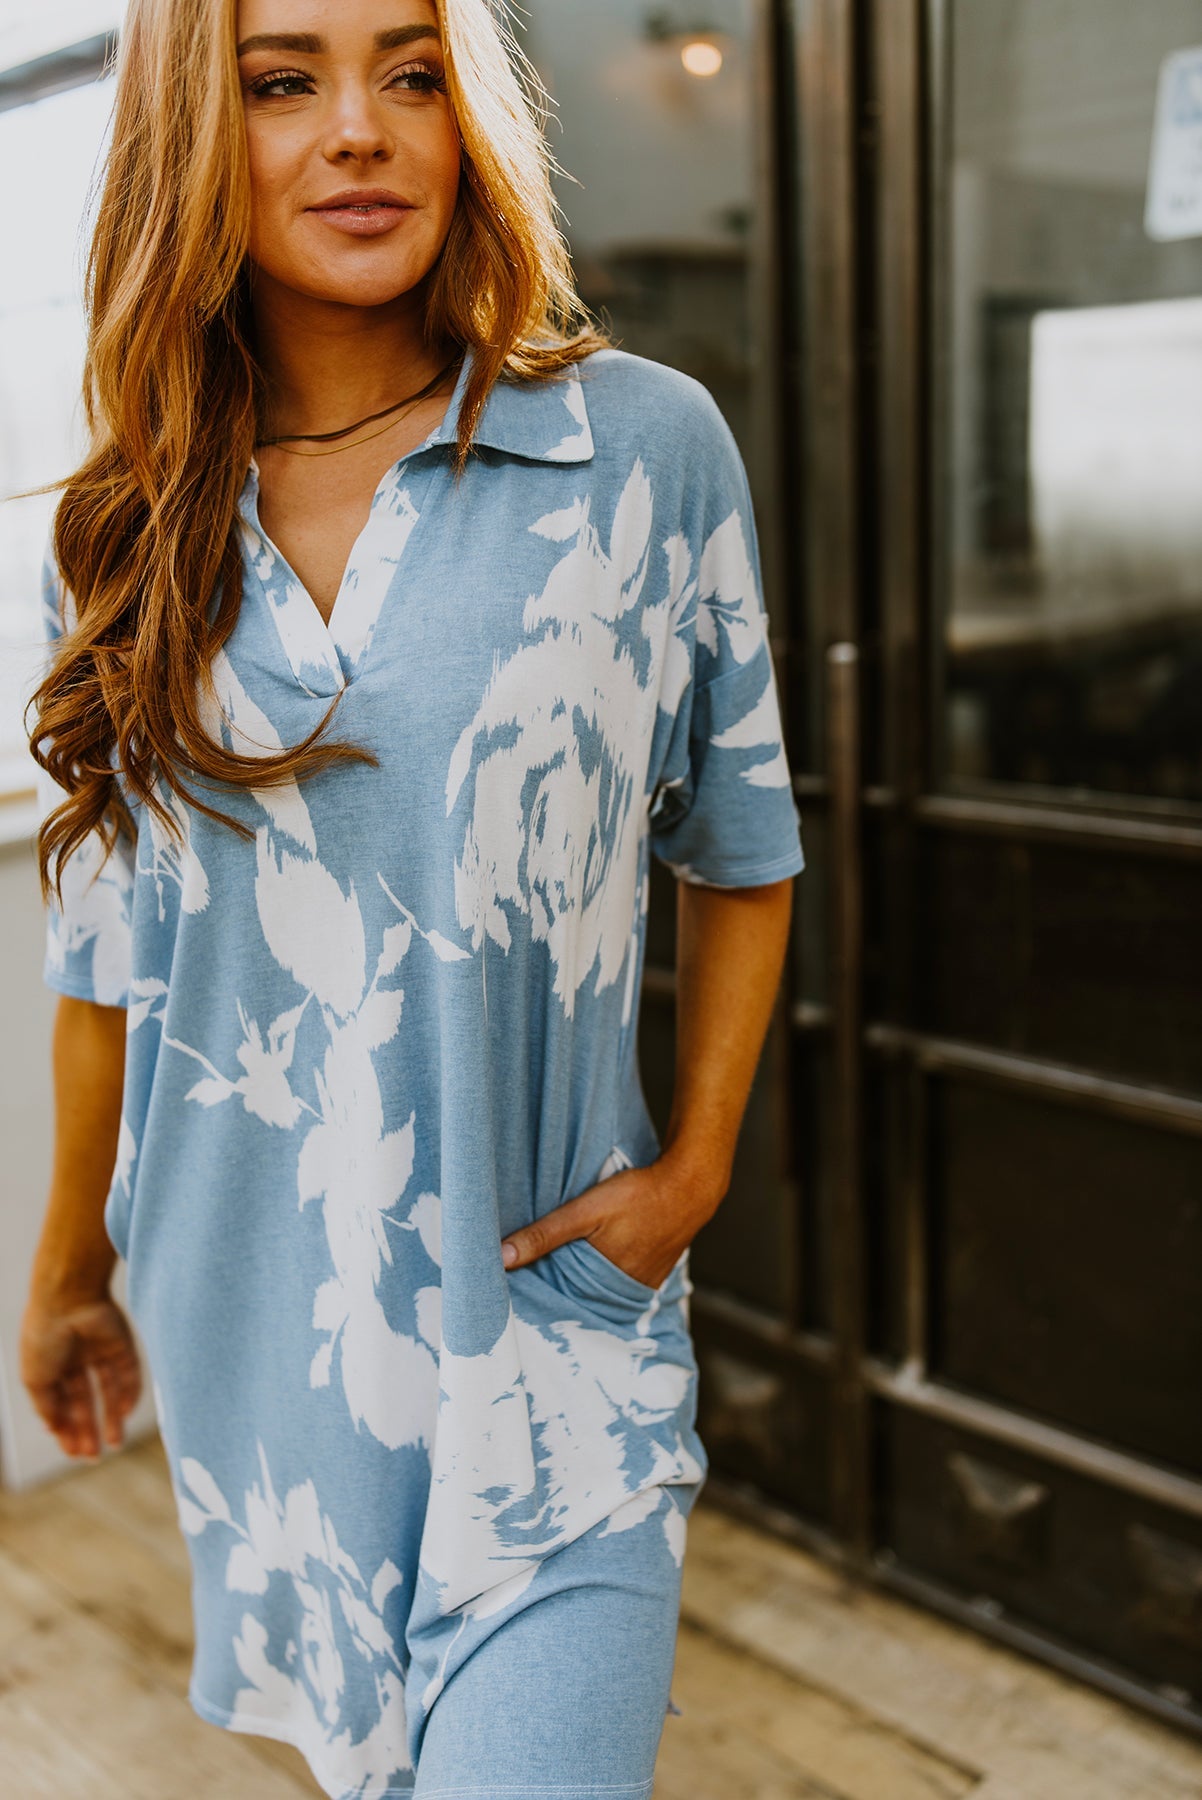 Prep Obsessed Blue Floral Dress, SMALL left!